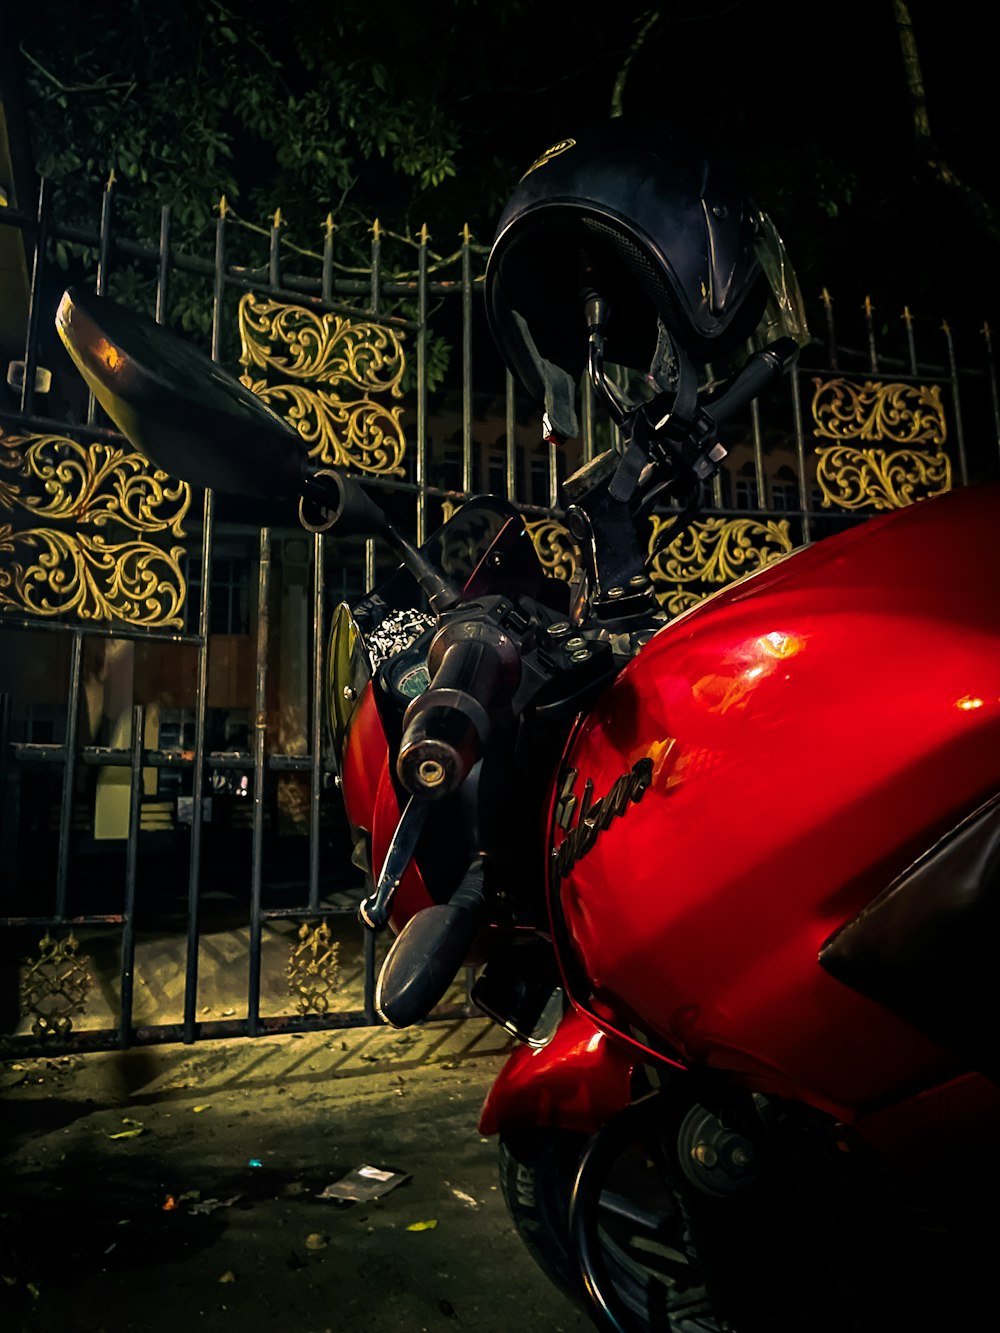 a red motorcycle parked in front of a gate